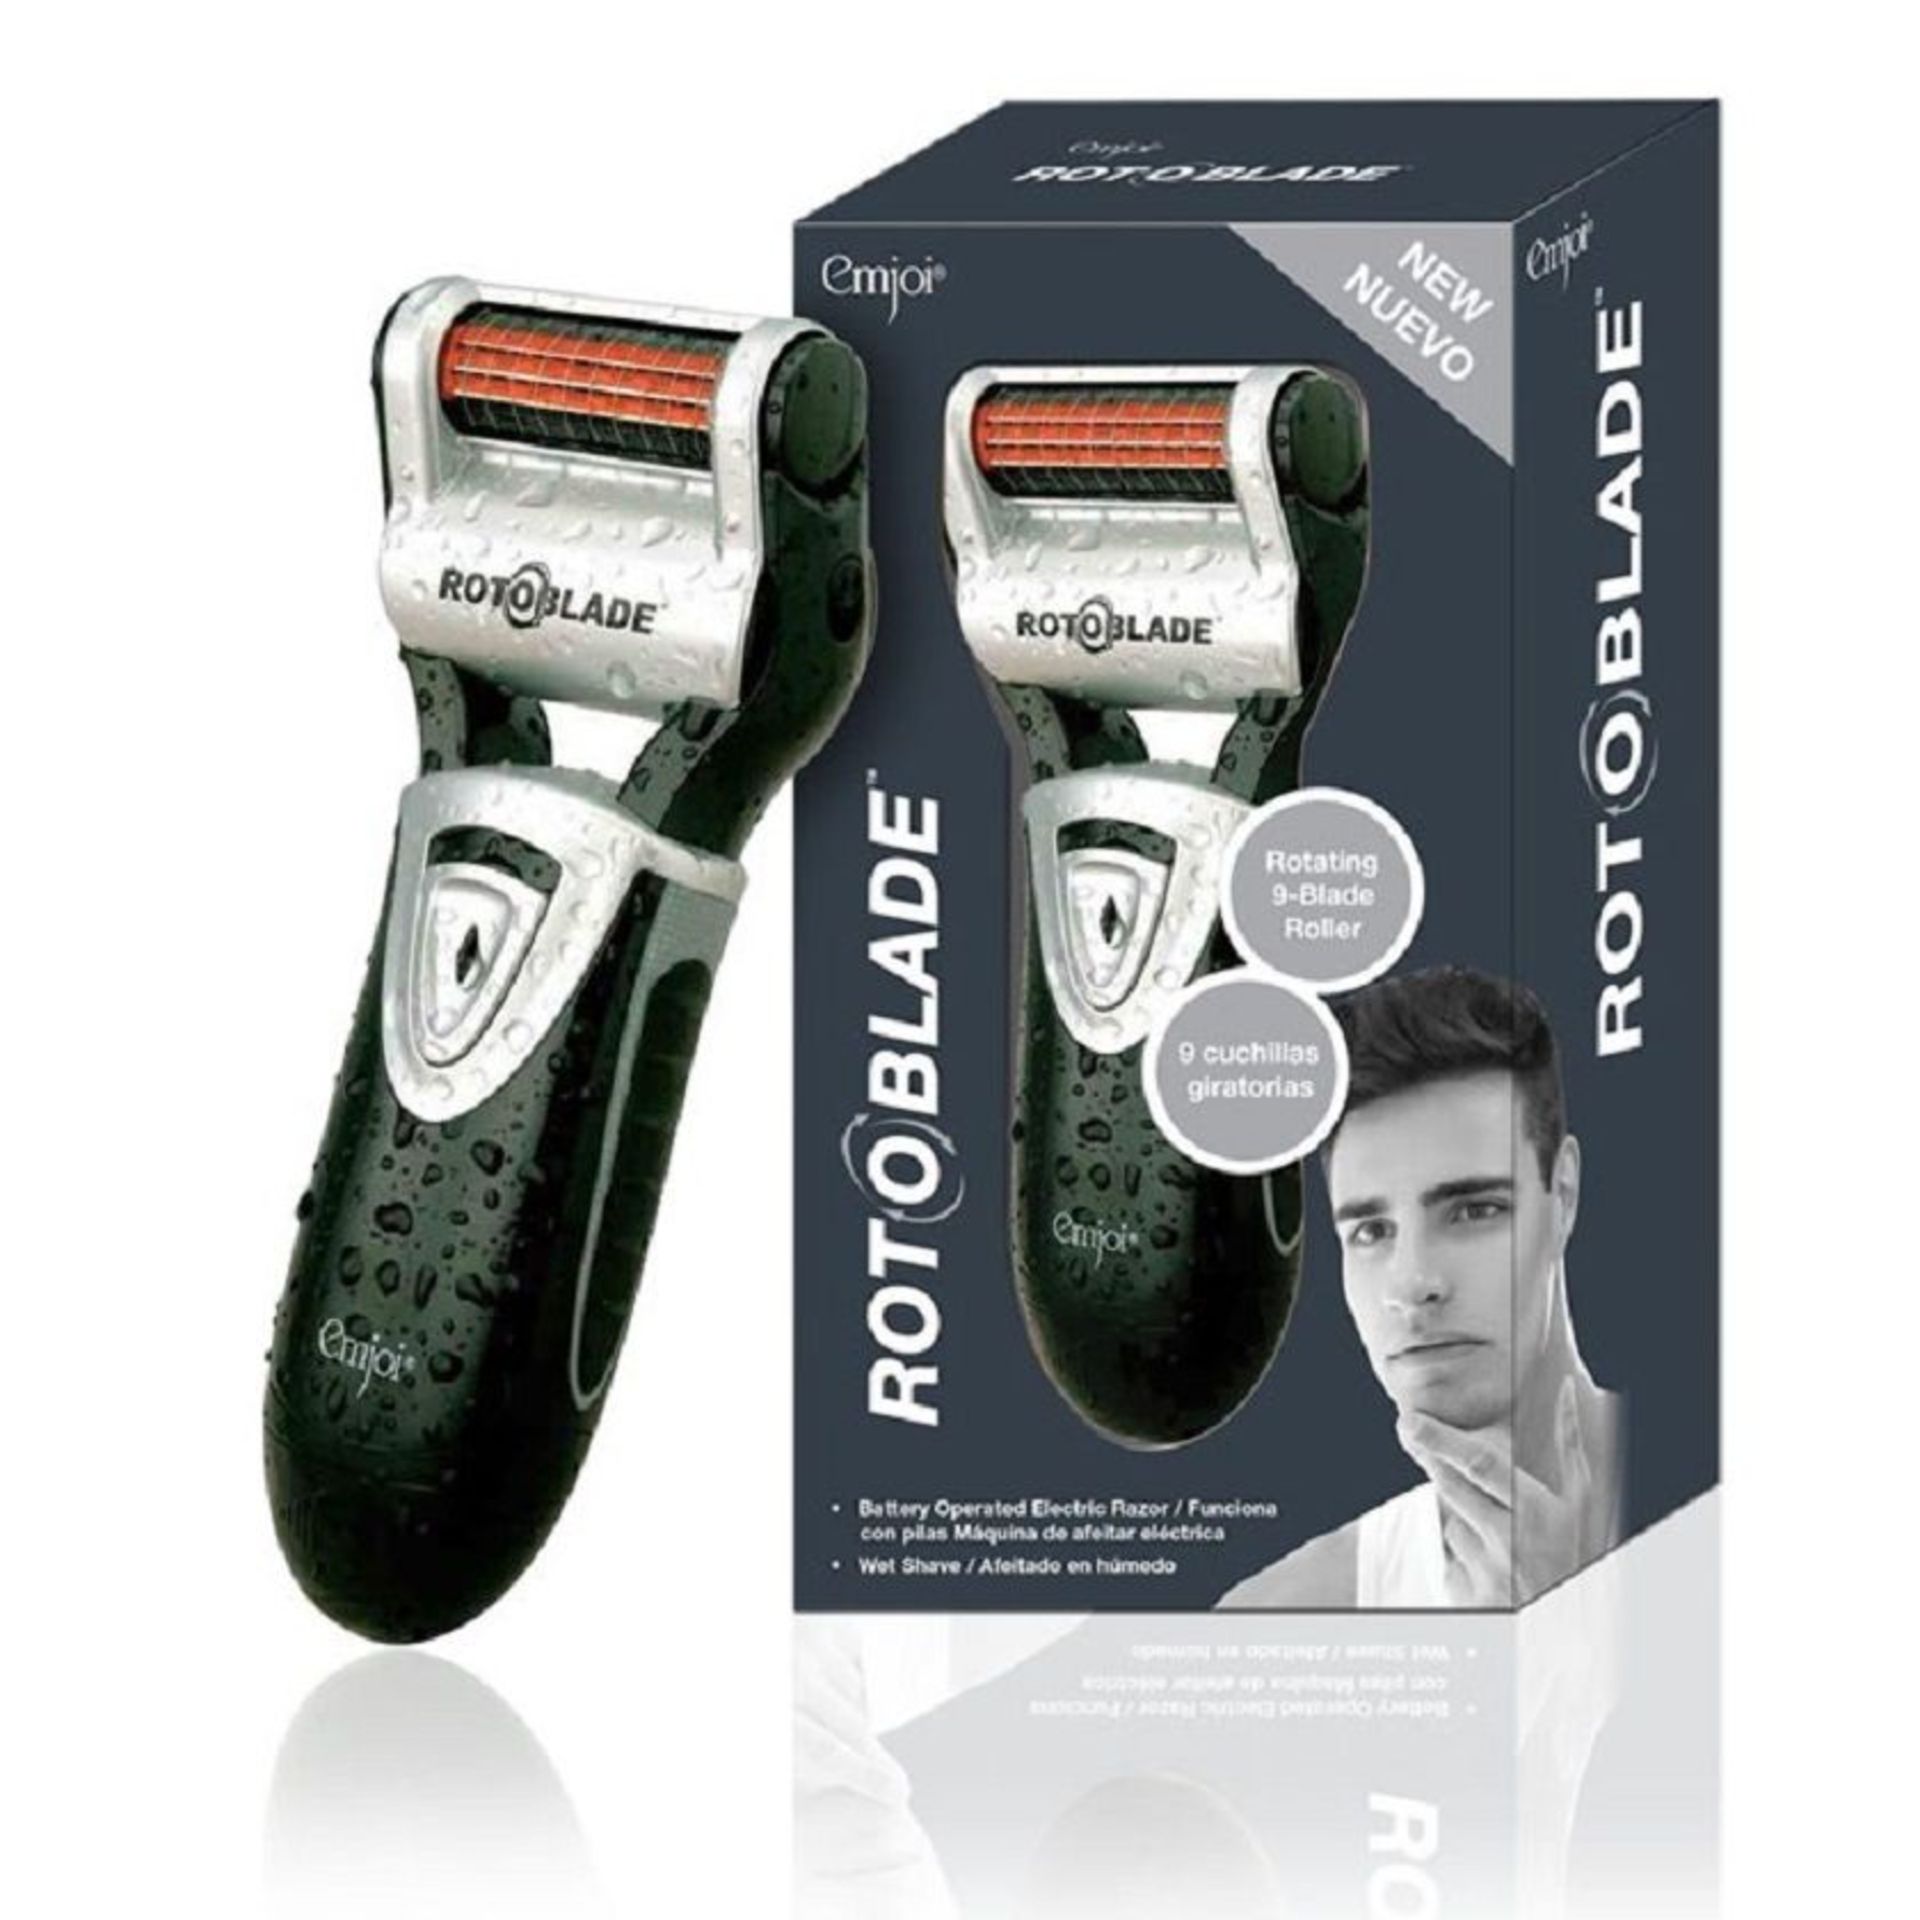 V *TRADE QTY* Brand New RotoBladed Waterproof Electric Razor 9 Rotating Blades at 30RPM CLoser Safer